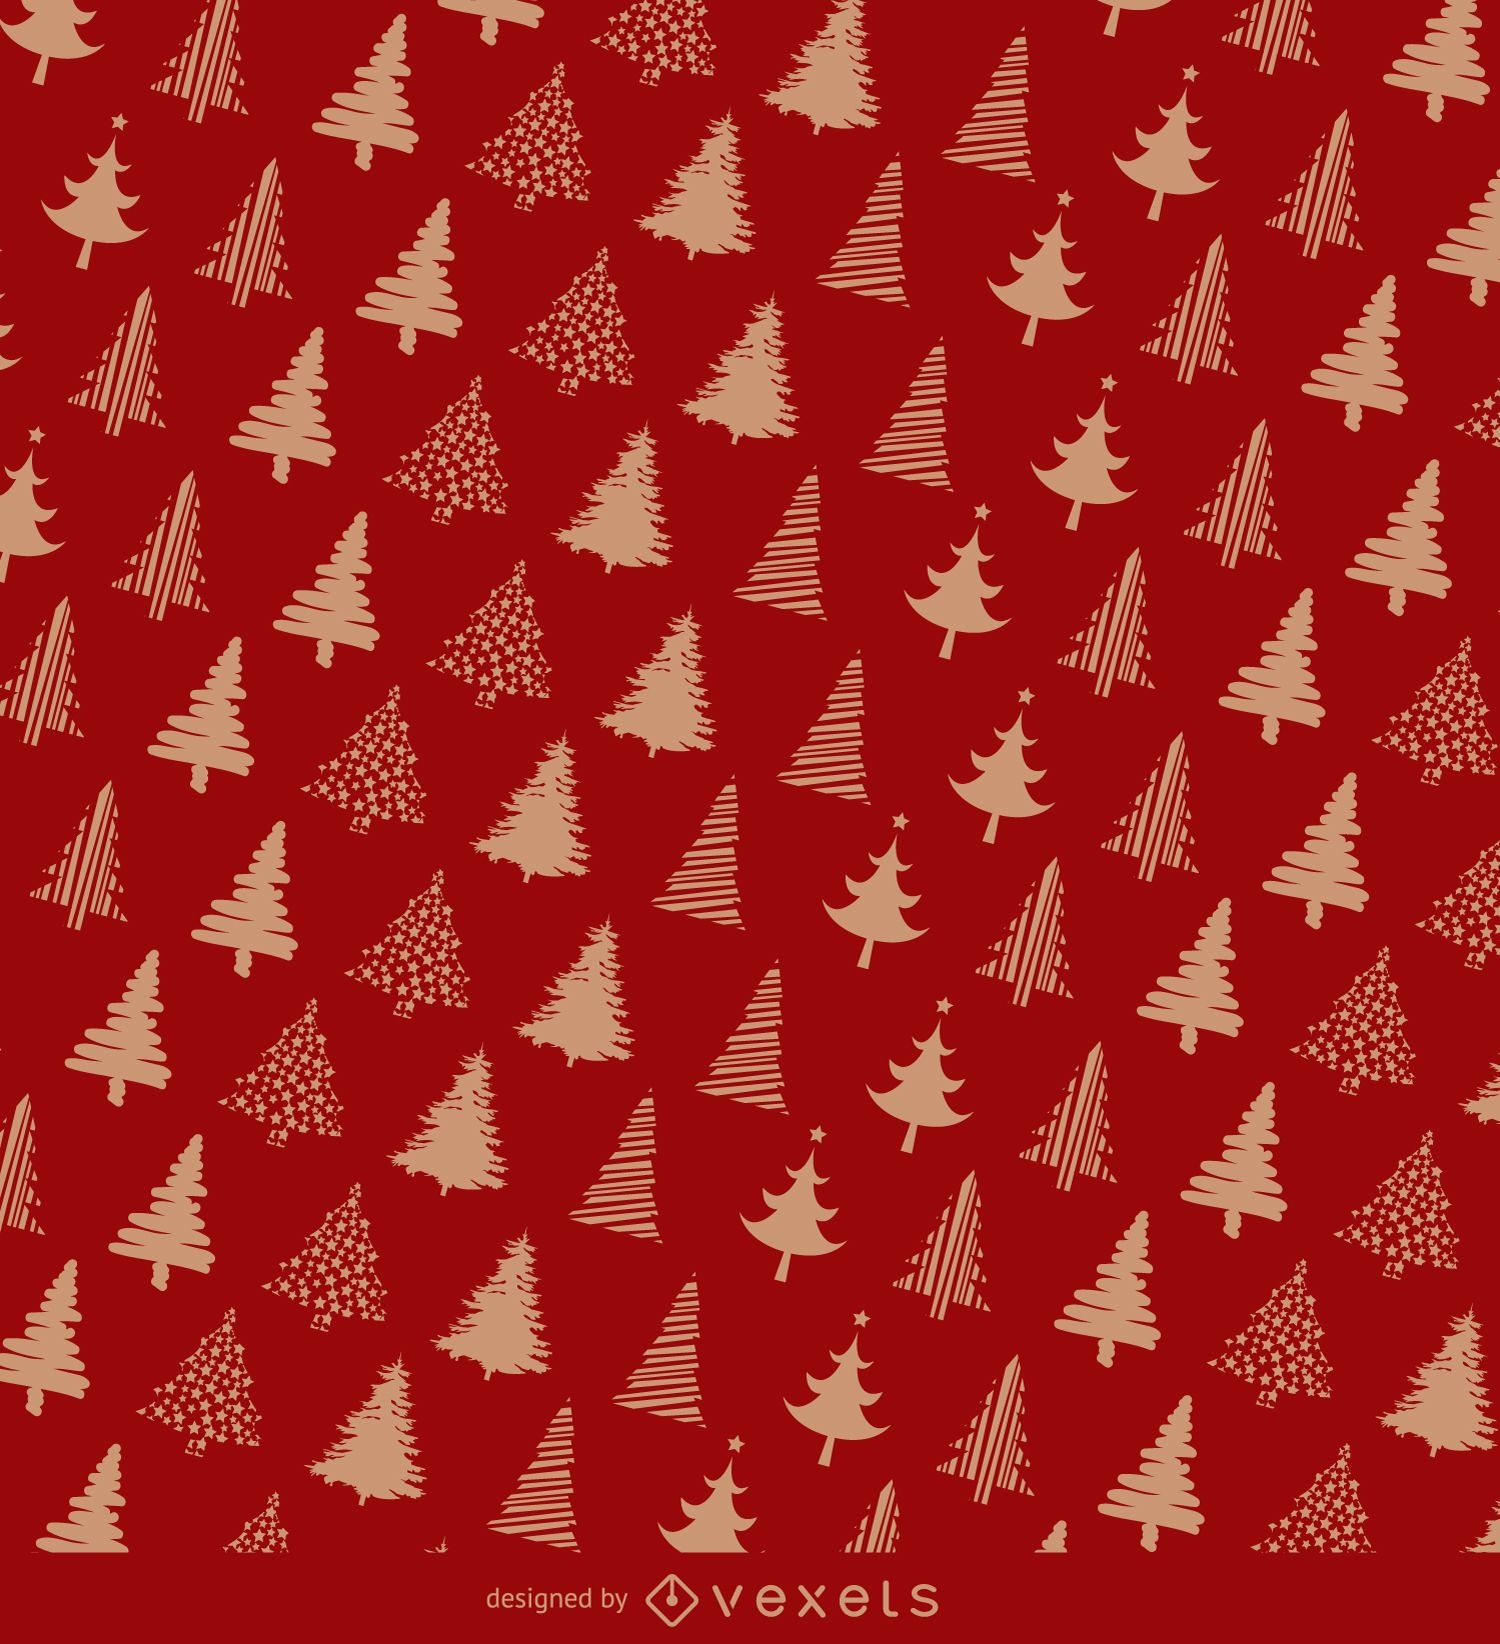 Christmas Wrapping Paper PNG Transparent Images Free Download